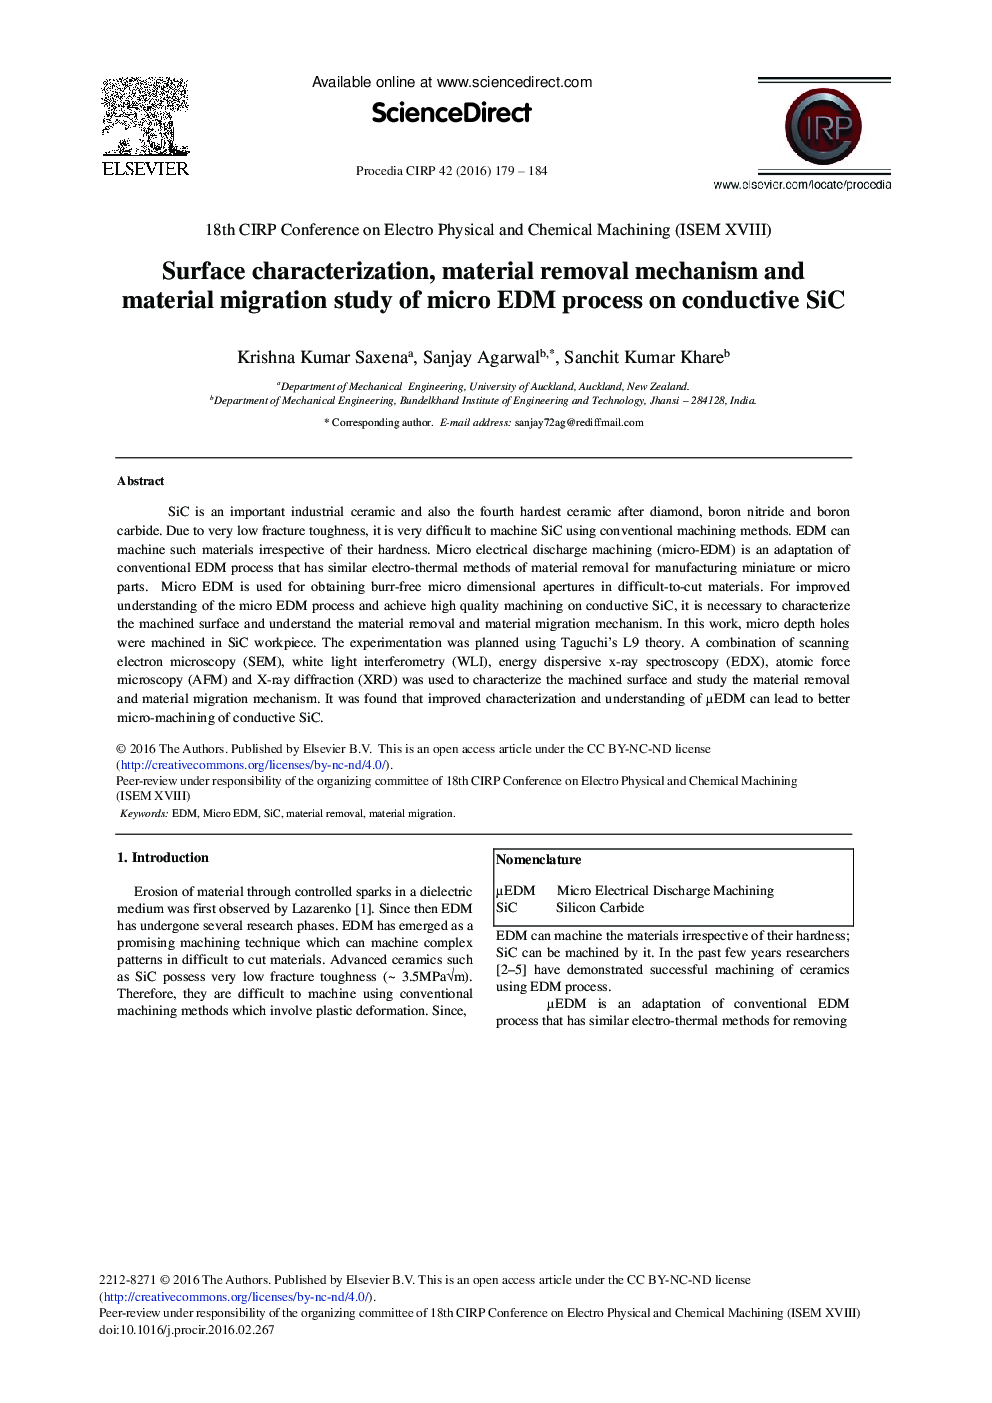 Surface Characterization, Material Removal Mechanism and Material Migration Study of Micro EDM Process on Conductive SiC 